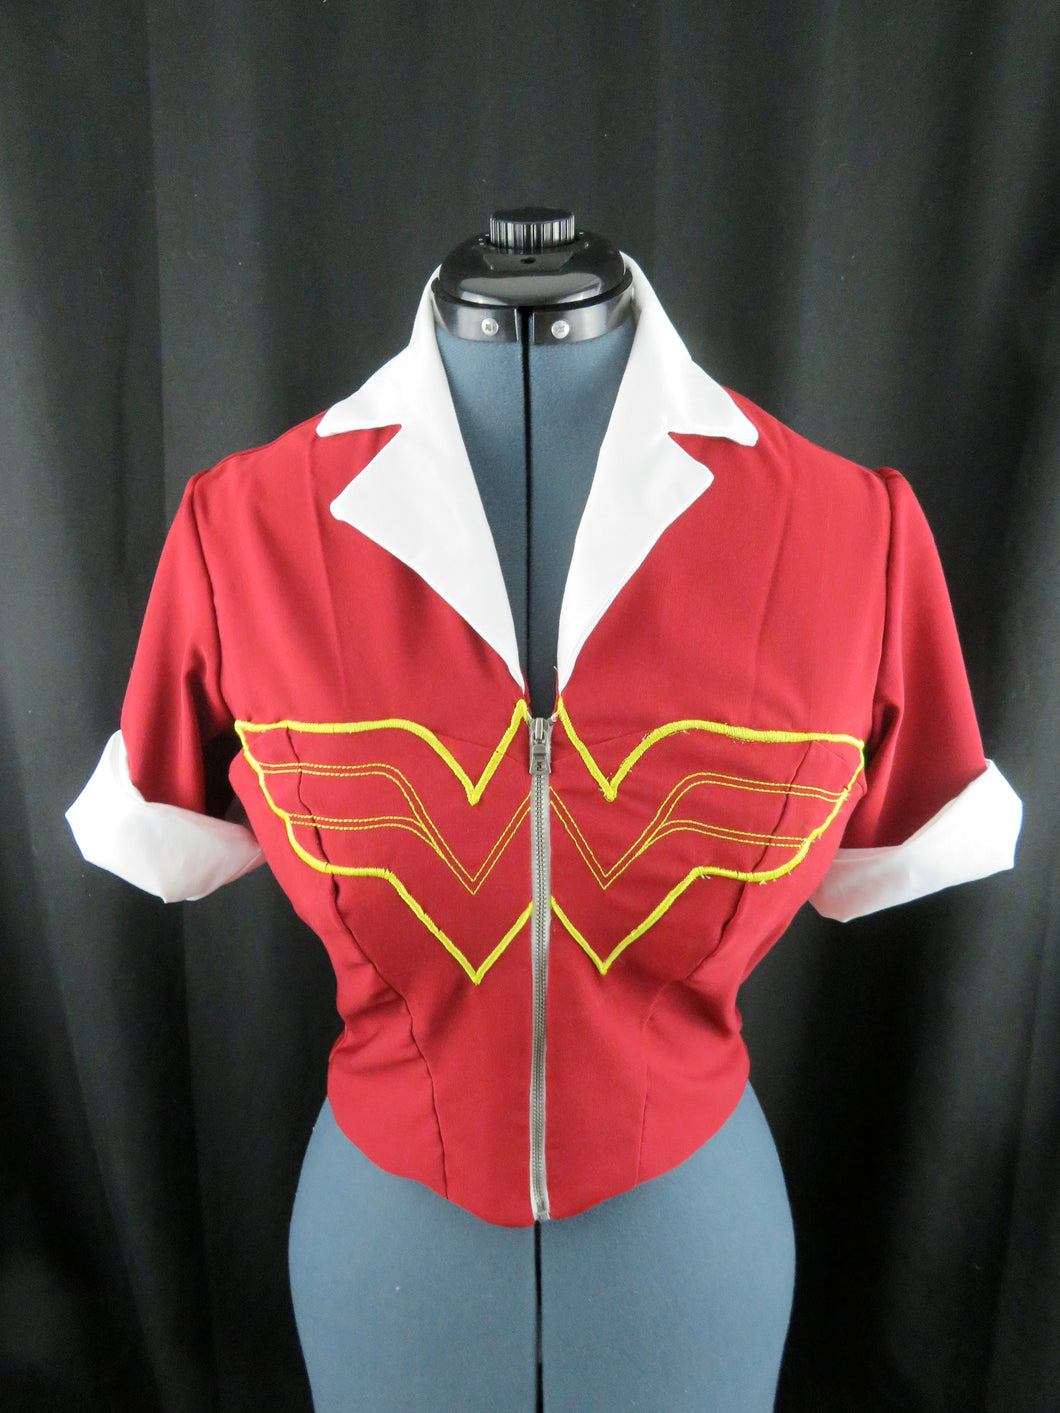 Custom Made Super hero Bombshell Zipup Top with Embroidered Front Cosplay Costume